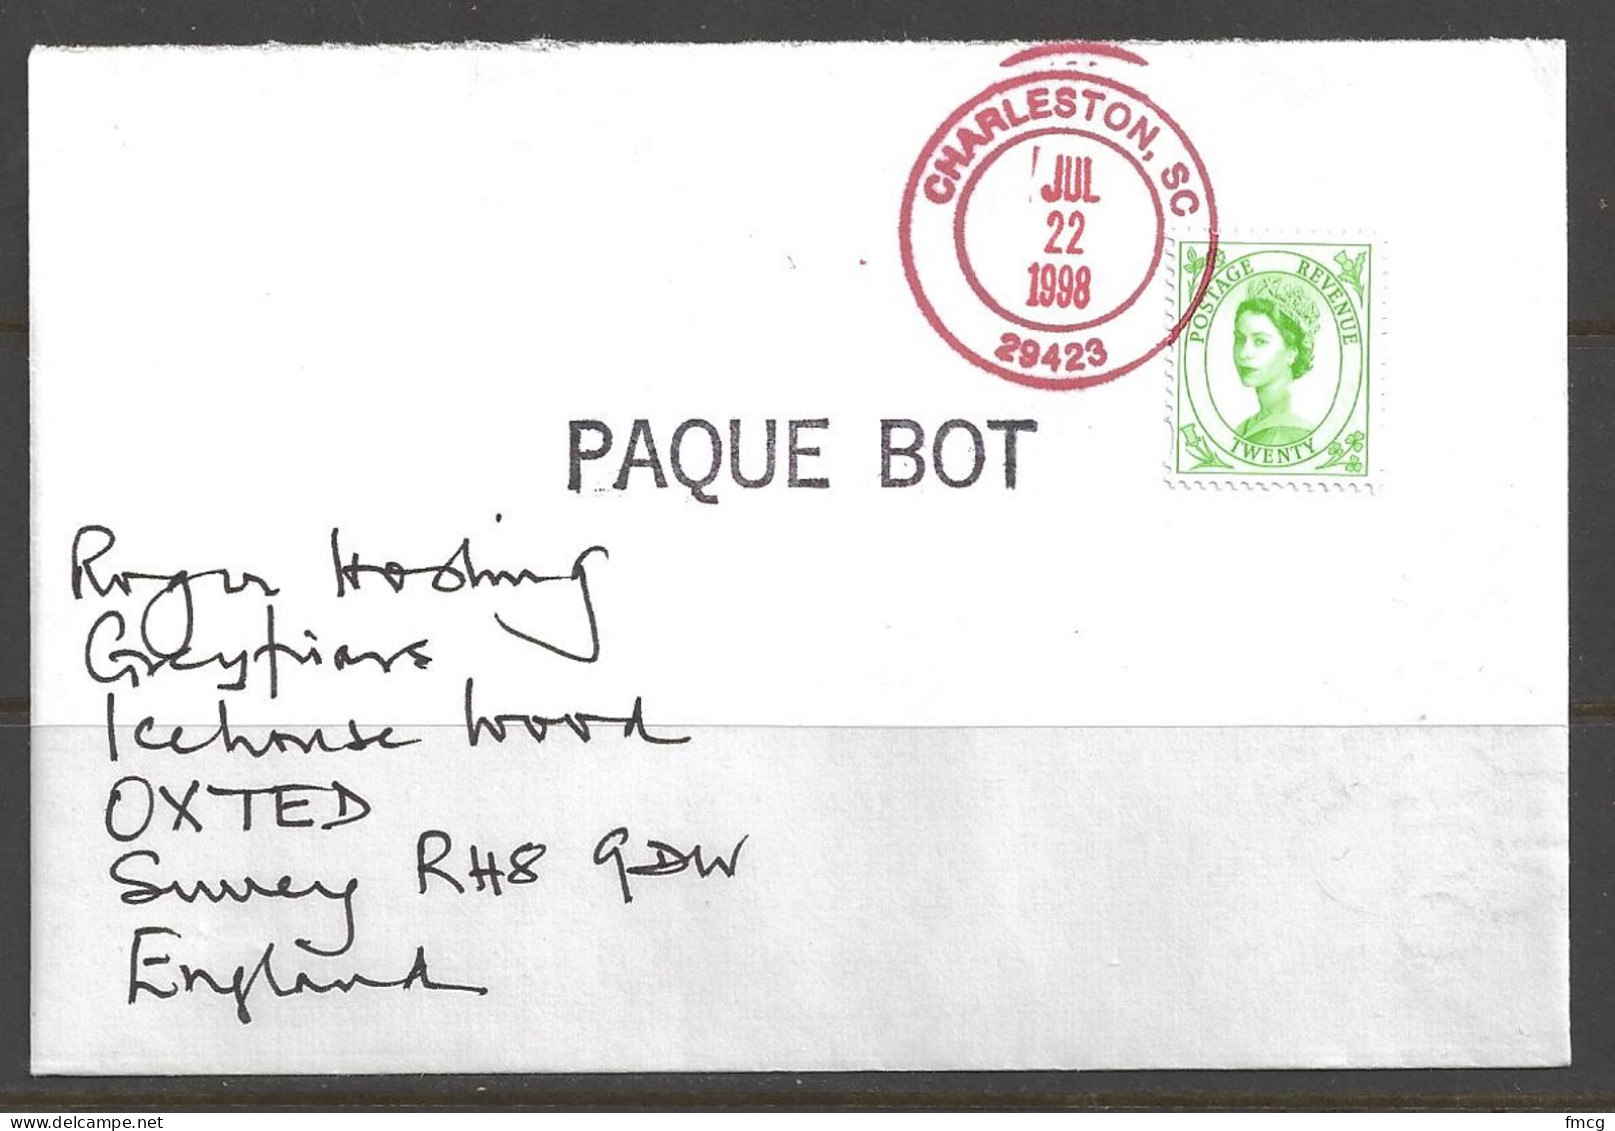 1998 Paquebot Cover, British Stamp Used In Charleston South Carolina (Jul 22) - Covers & Documents